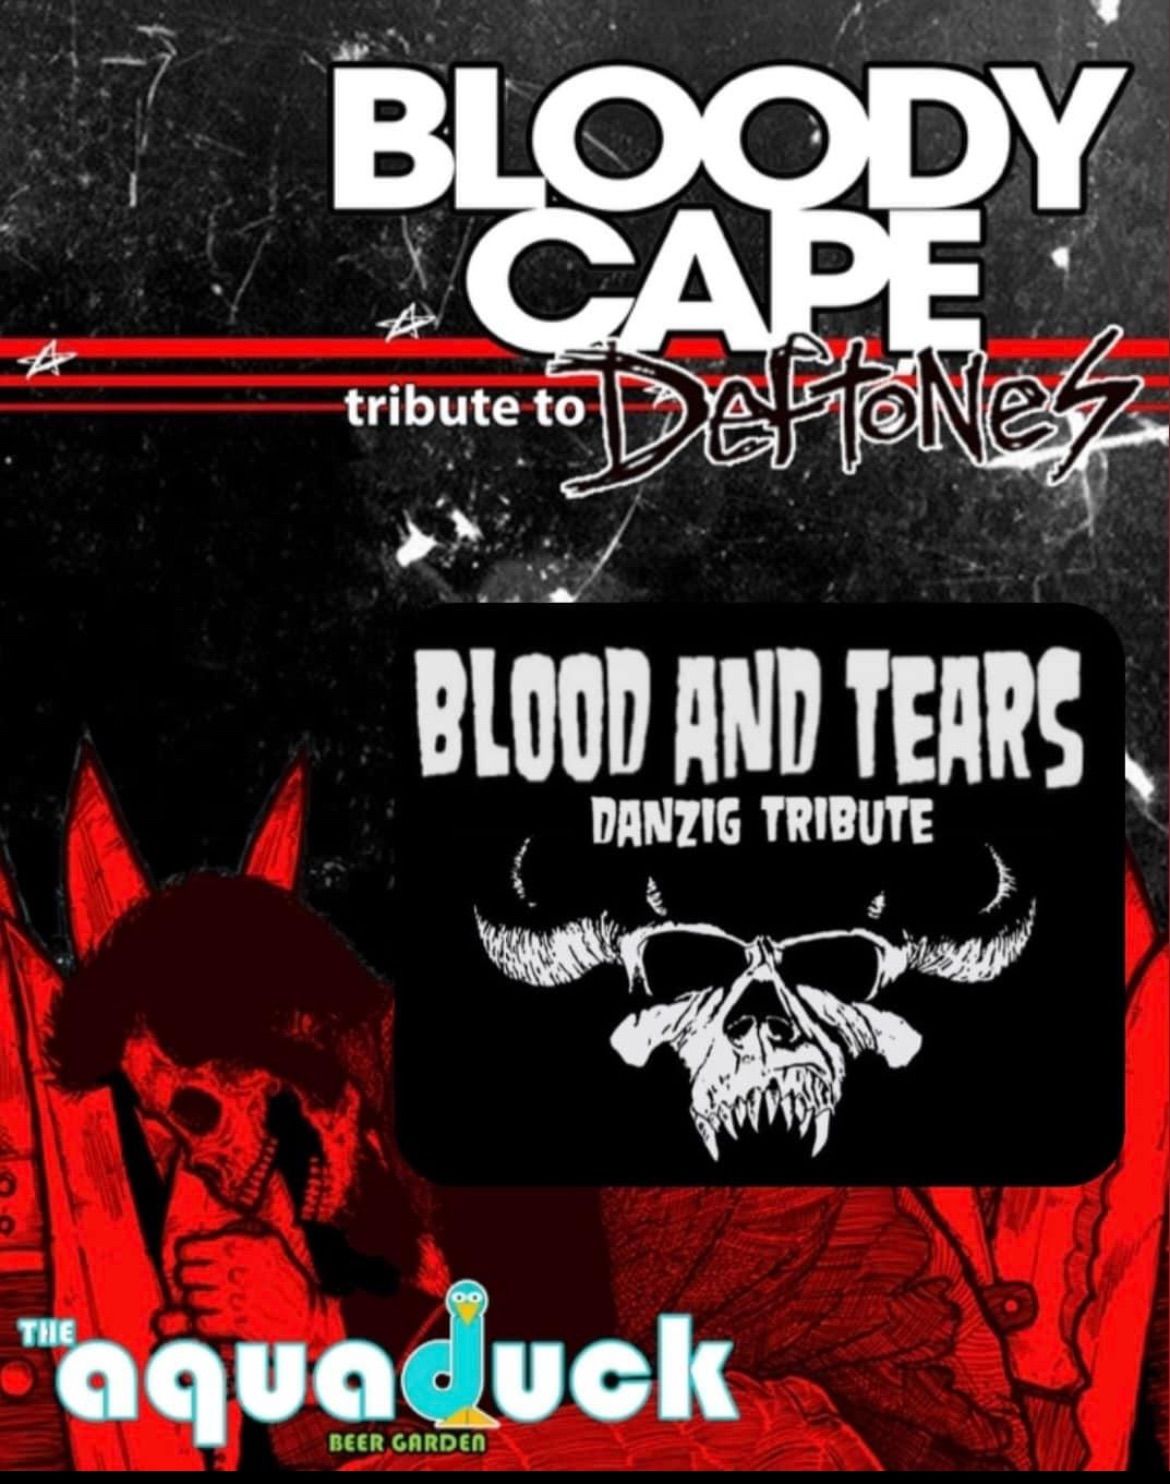 Bloody Cape a Deftones tribute & Blood and Tears a Danzig tribute with FREE Car Show!